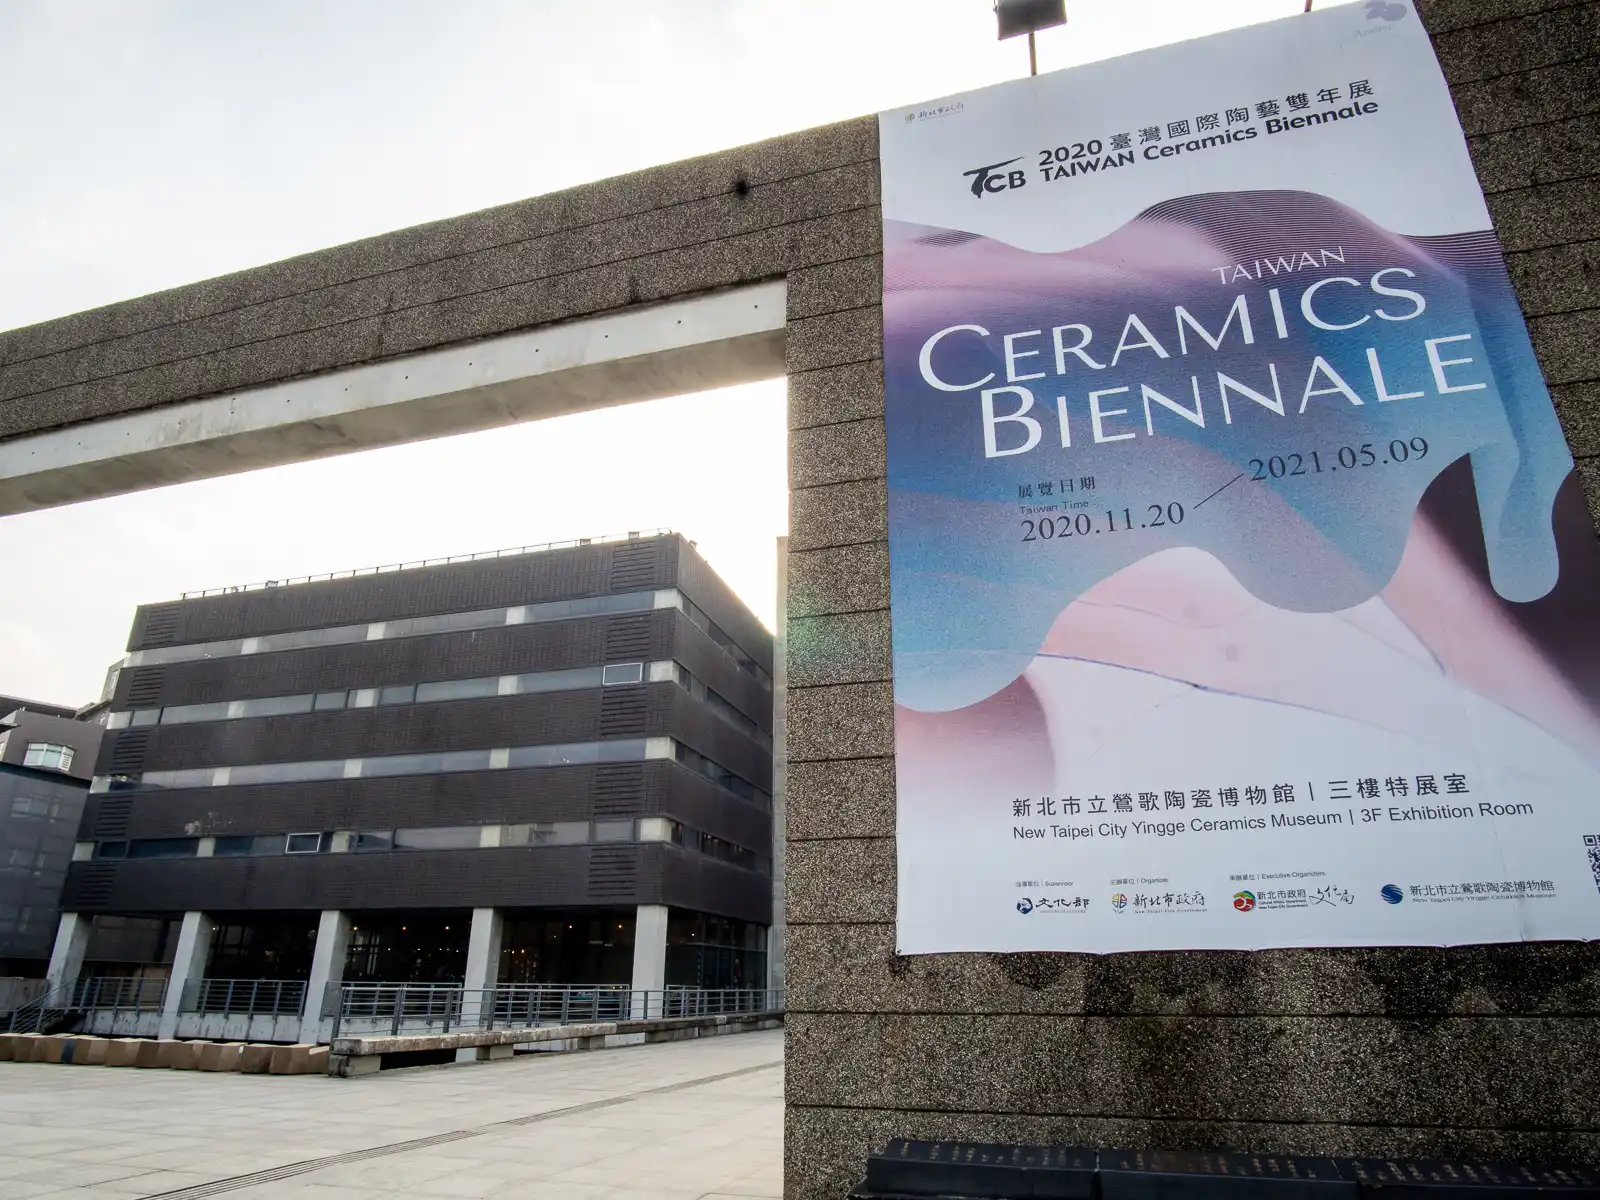 A large poster outside of the Yingge Ceramics Museum advertises the Ceramics Biennial.